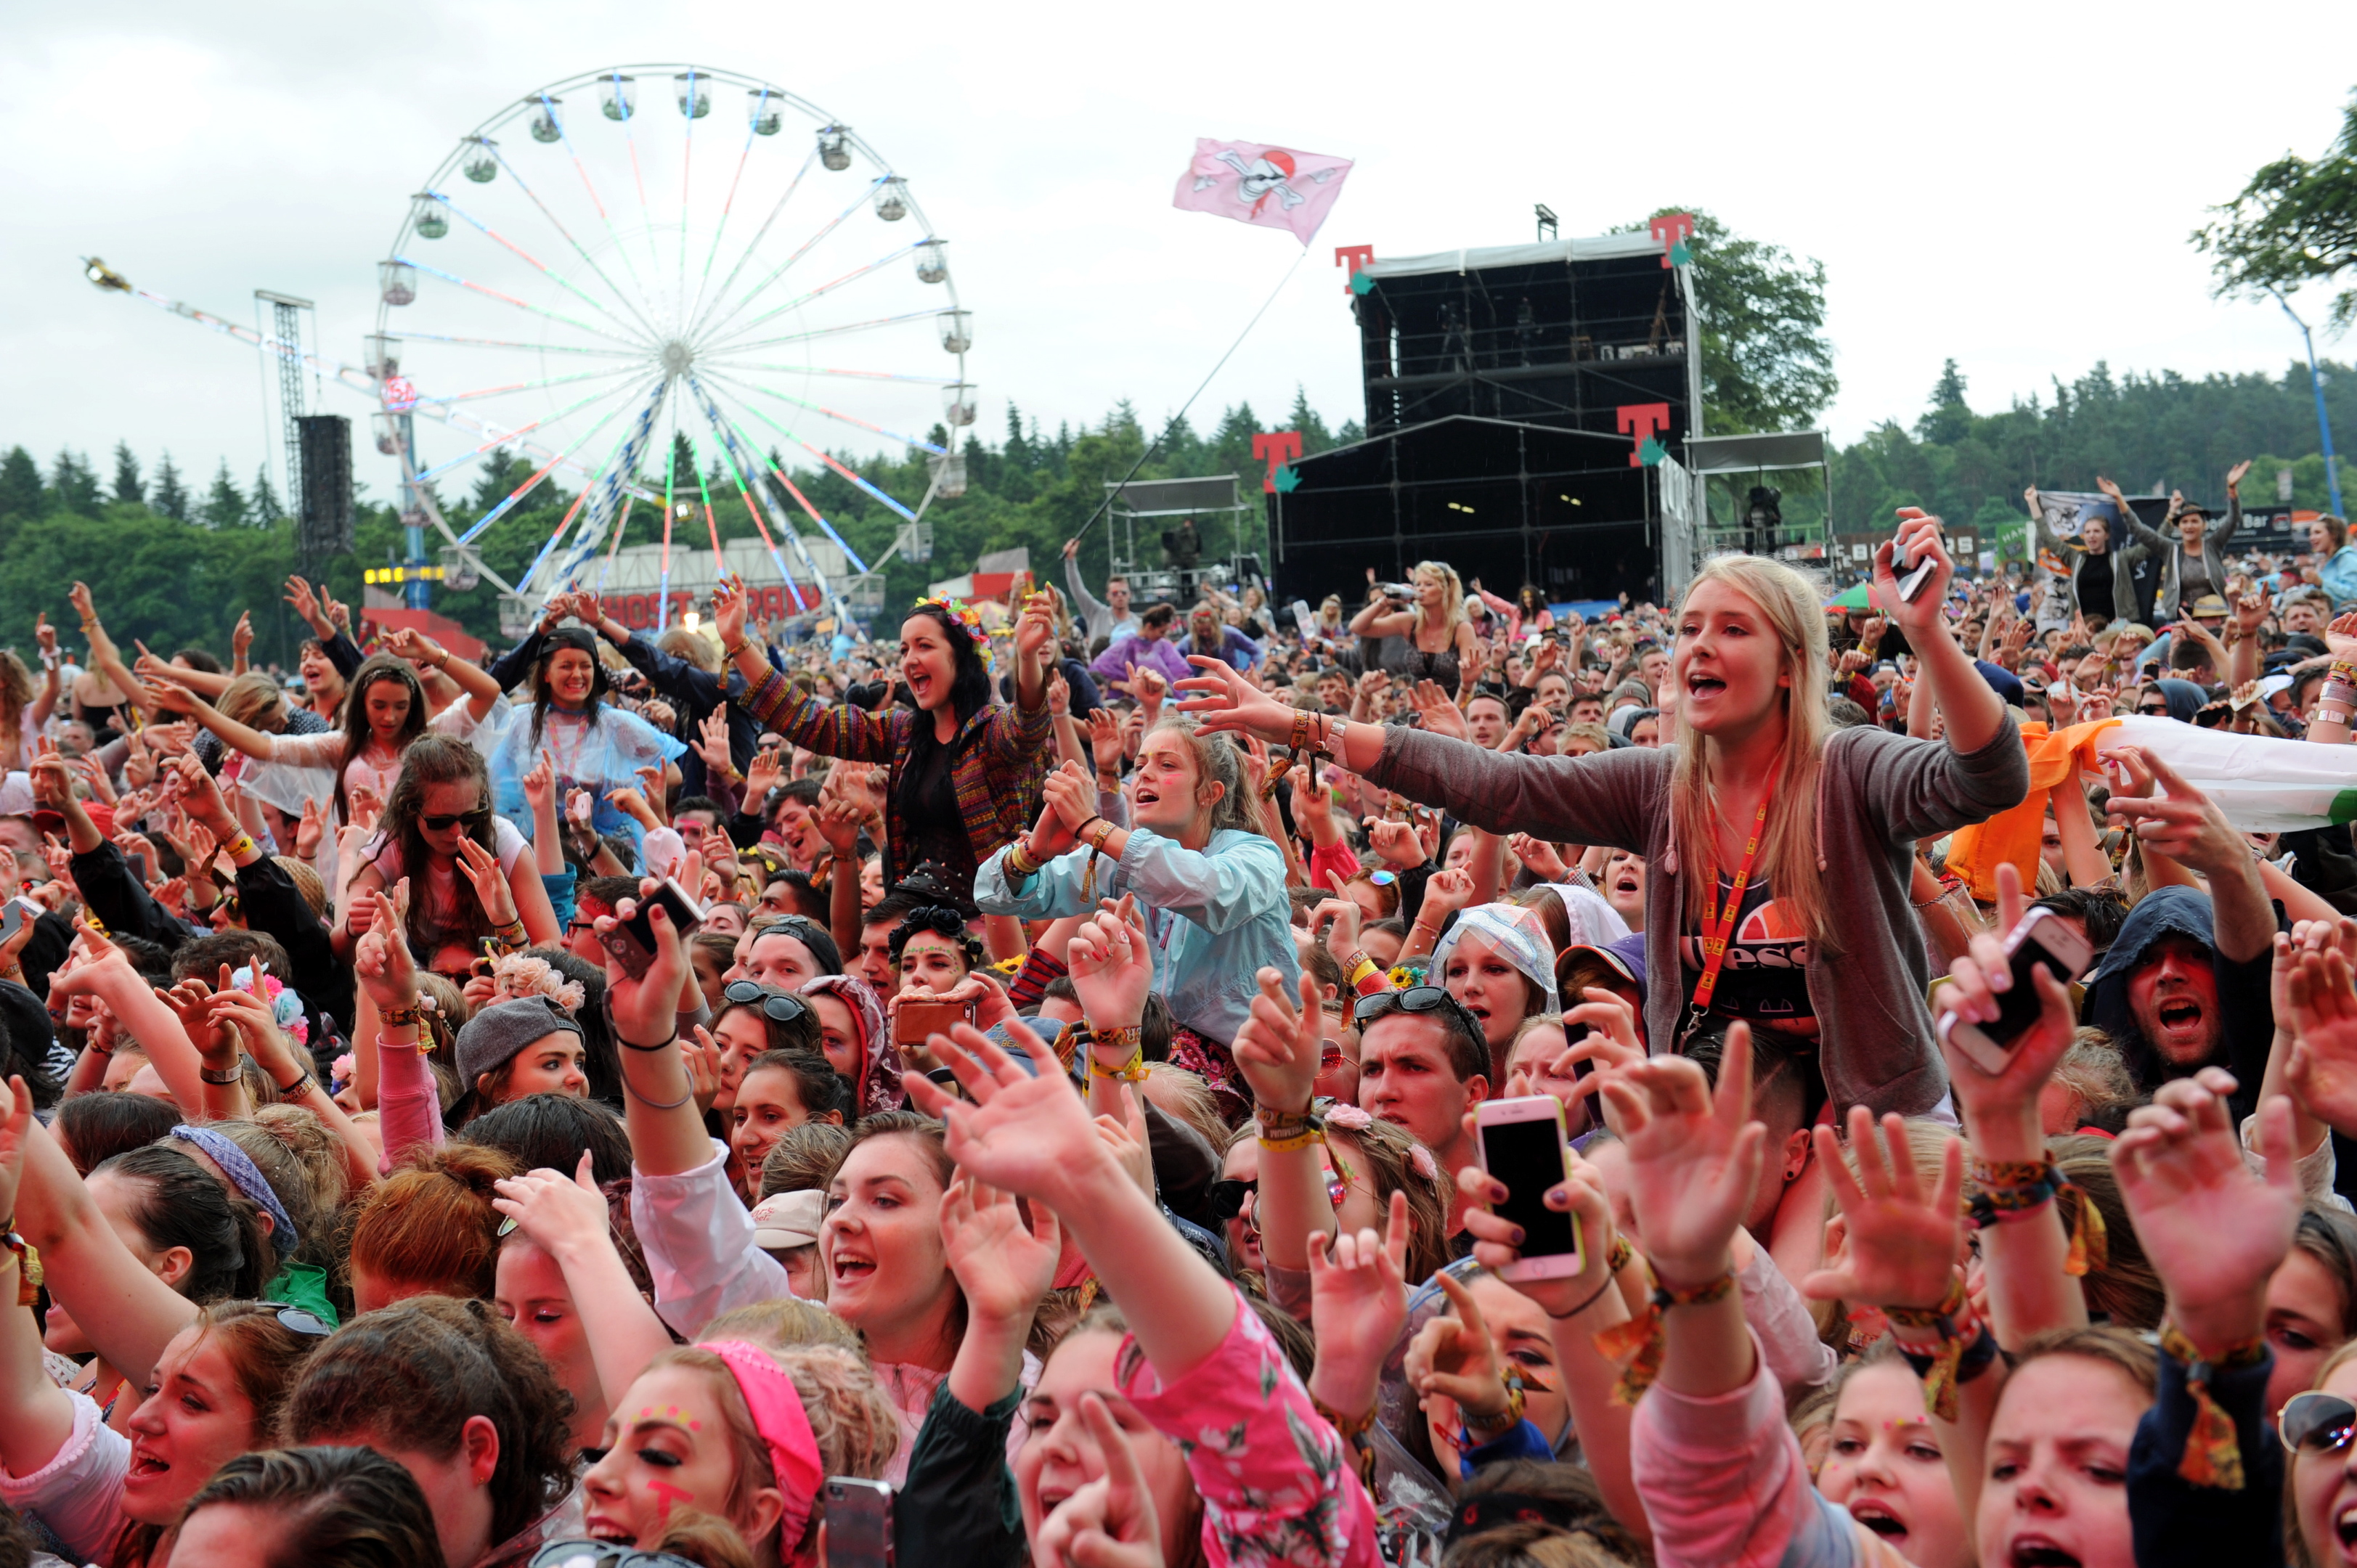 T in the Park crowds going wild this afternoon. Picture by Kenny Elrick